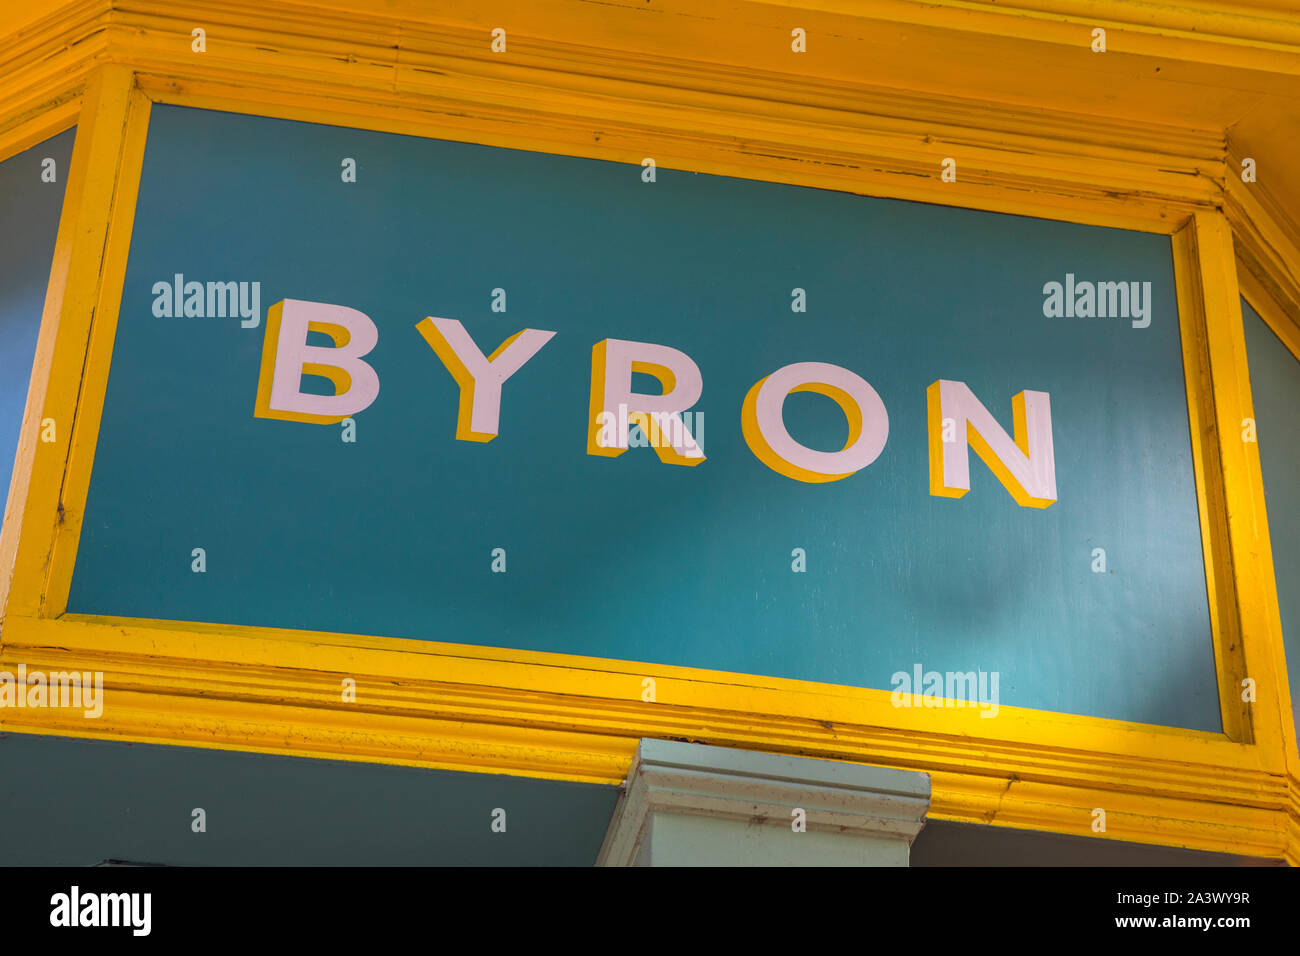 Birmingham, UK - September 20th 2019: The Byron logo above the entrance to one of their hamburger restaurants in the city of Birmingham, UK. Stock Photo